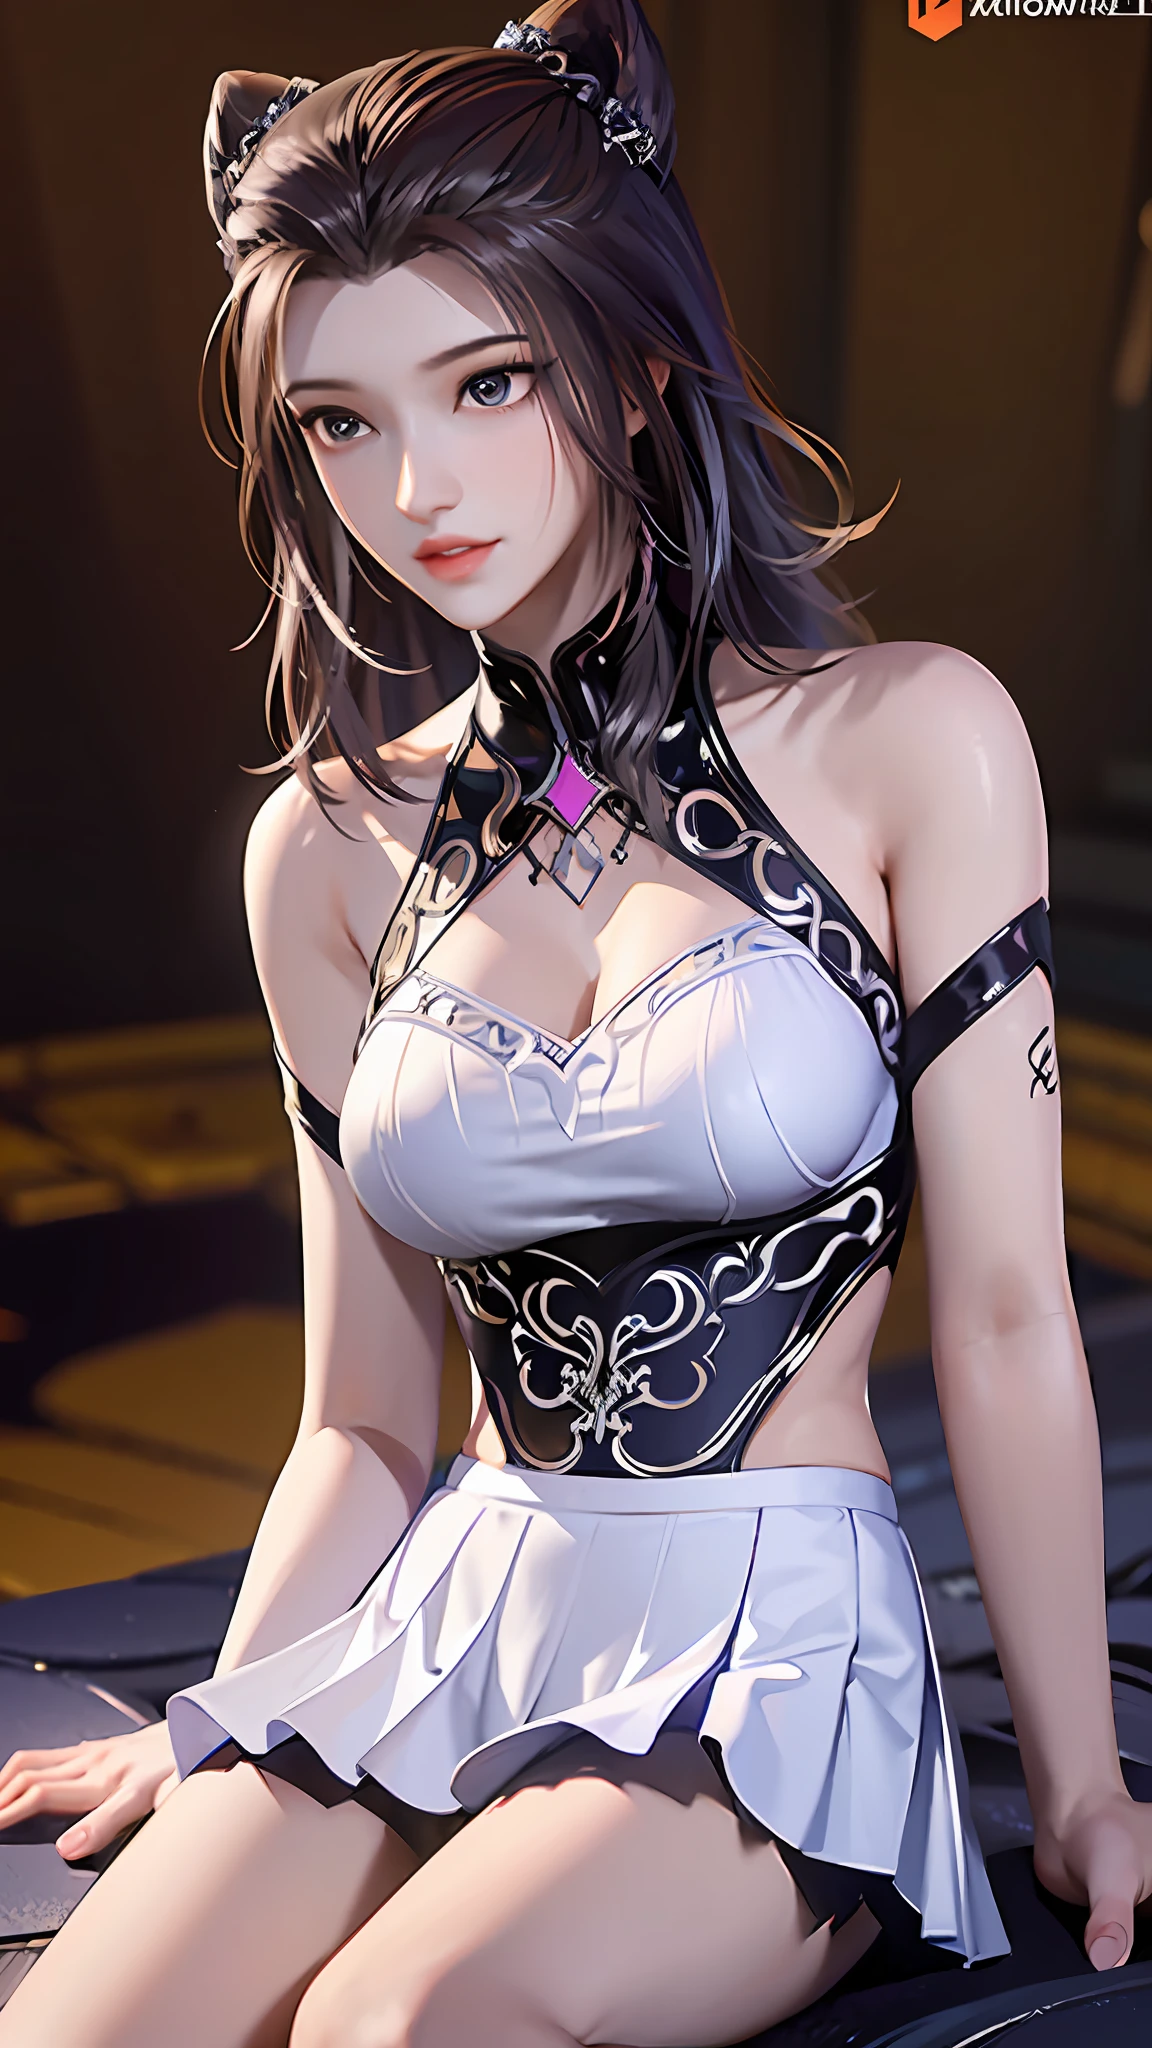 ((Dark Light, Top Quality, 8K, Masterpiece: 1.3)), (Focus: 1.2), (In Chinese, Casual Theme, Indoor: 1.5), (Beauty & Slim Abs: 1.4), ((Layered Hairstyle)), (White Shirt: 1.6), (White Lace Short Skirt: 1.3), Highly Detailed Face and Skin Texture, Whitening Skin, (Full Body: 1.4), White Clothes, Security, Water Element, Dark Forest, Night, Spooky and Contrasting